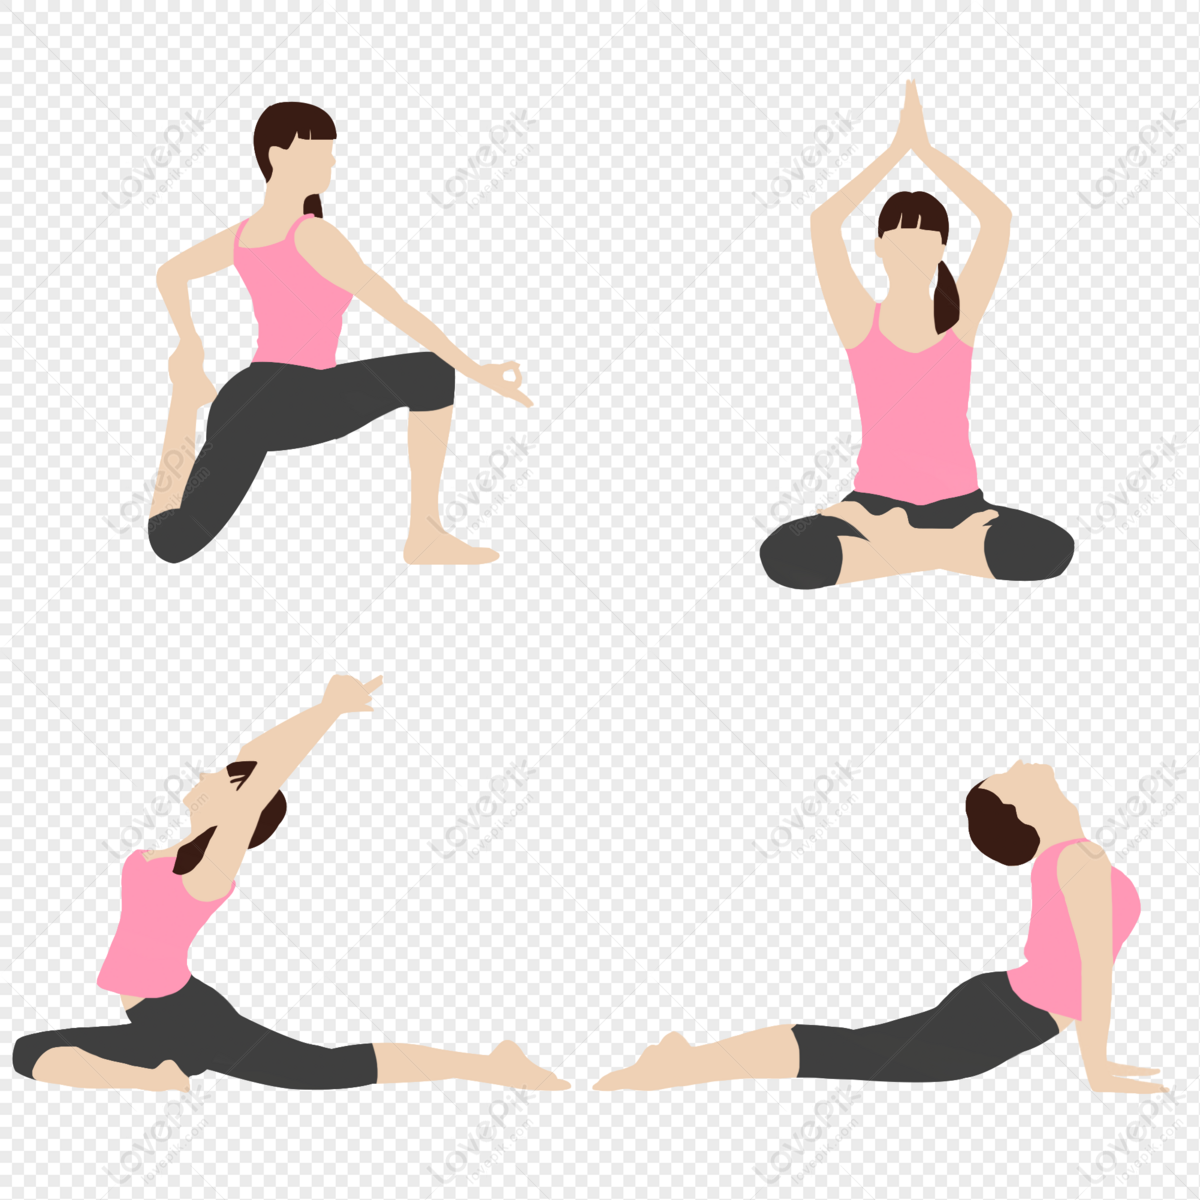 Cartoon Yoga PNG Images With Transparent Background